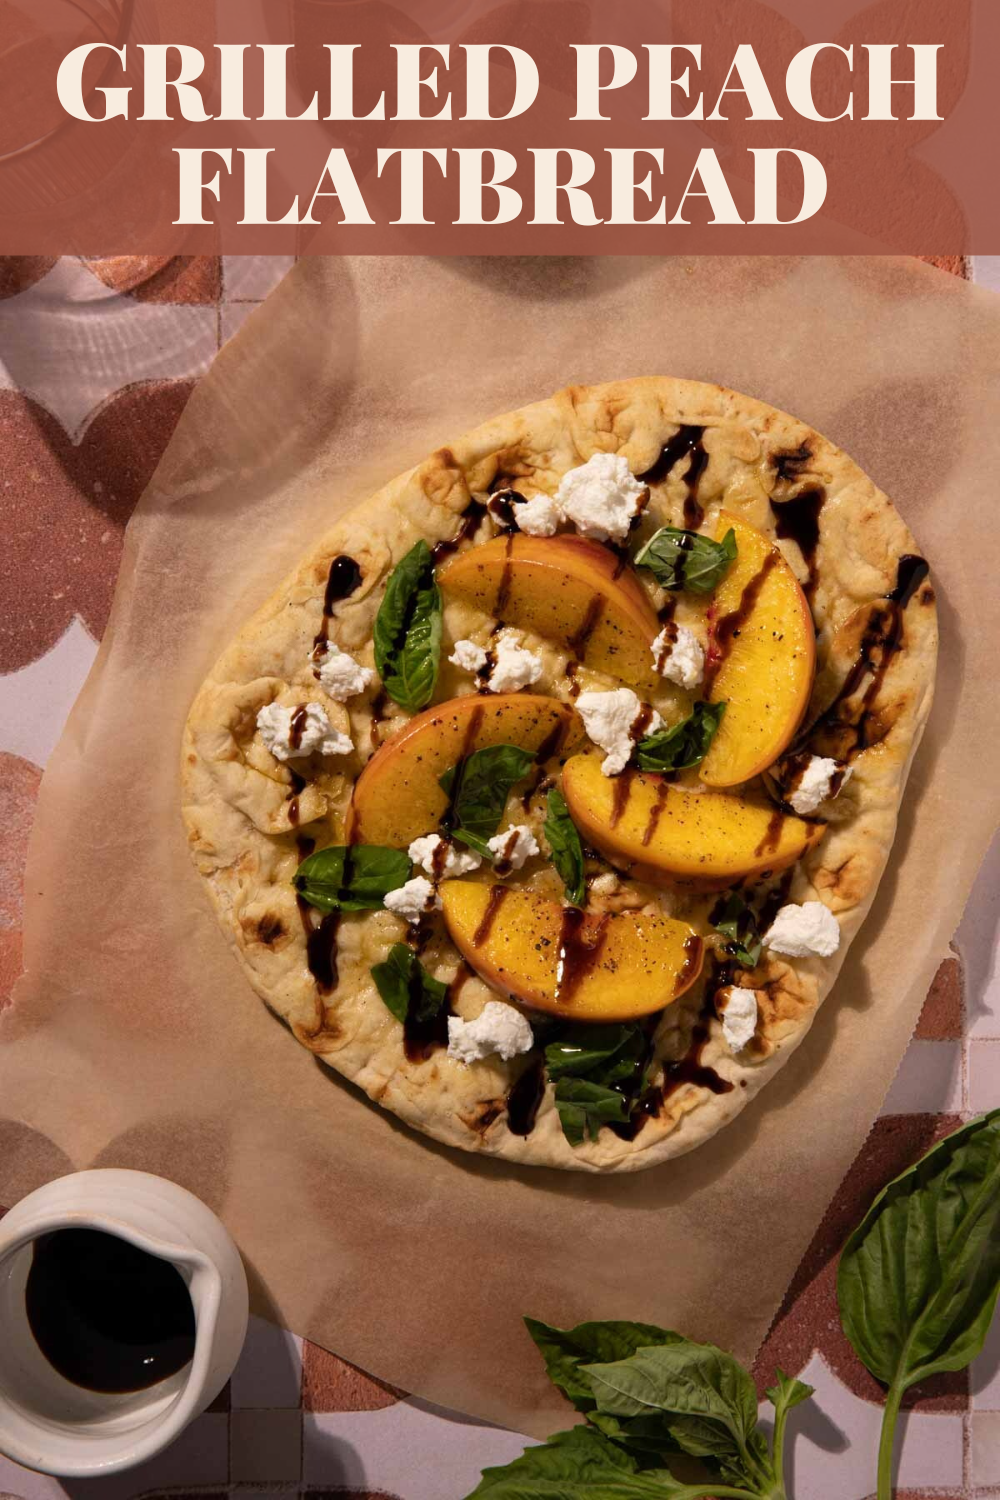 Grilled Peach Flatbread with goat cheese and balsamic glaze is the perfect appetizer or light lunch or dinner via @bessiebakes